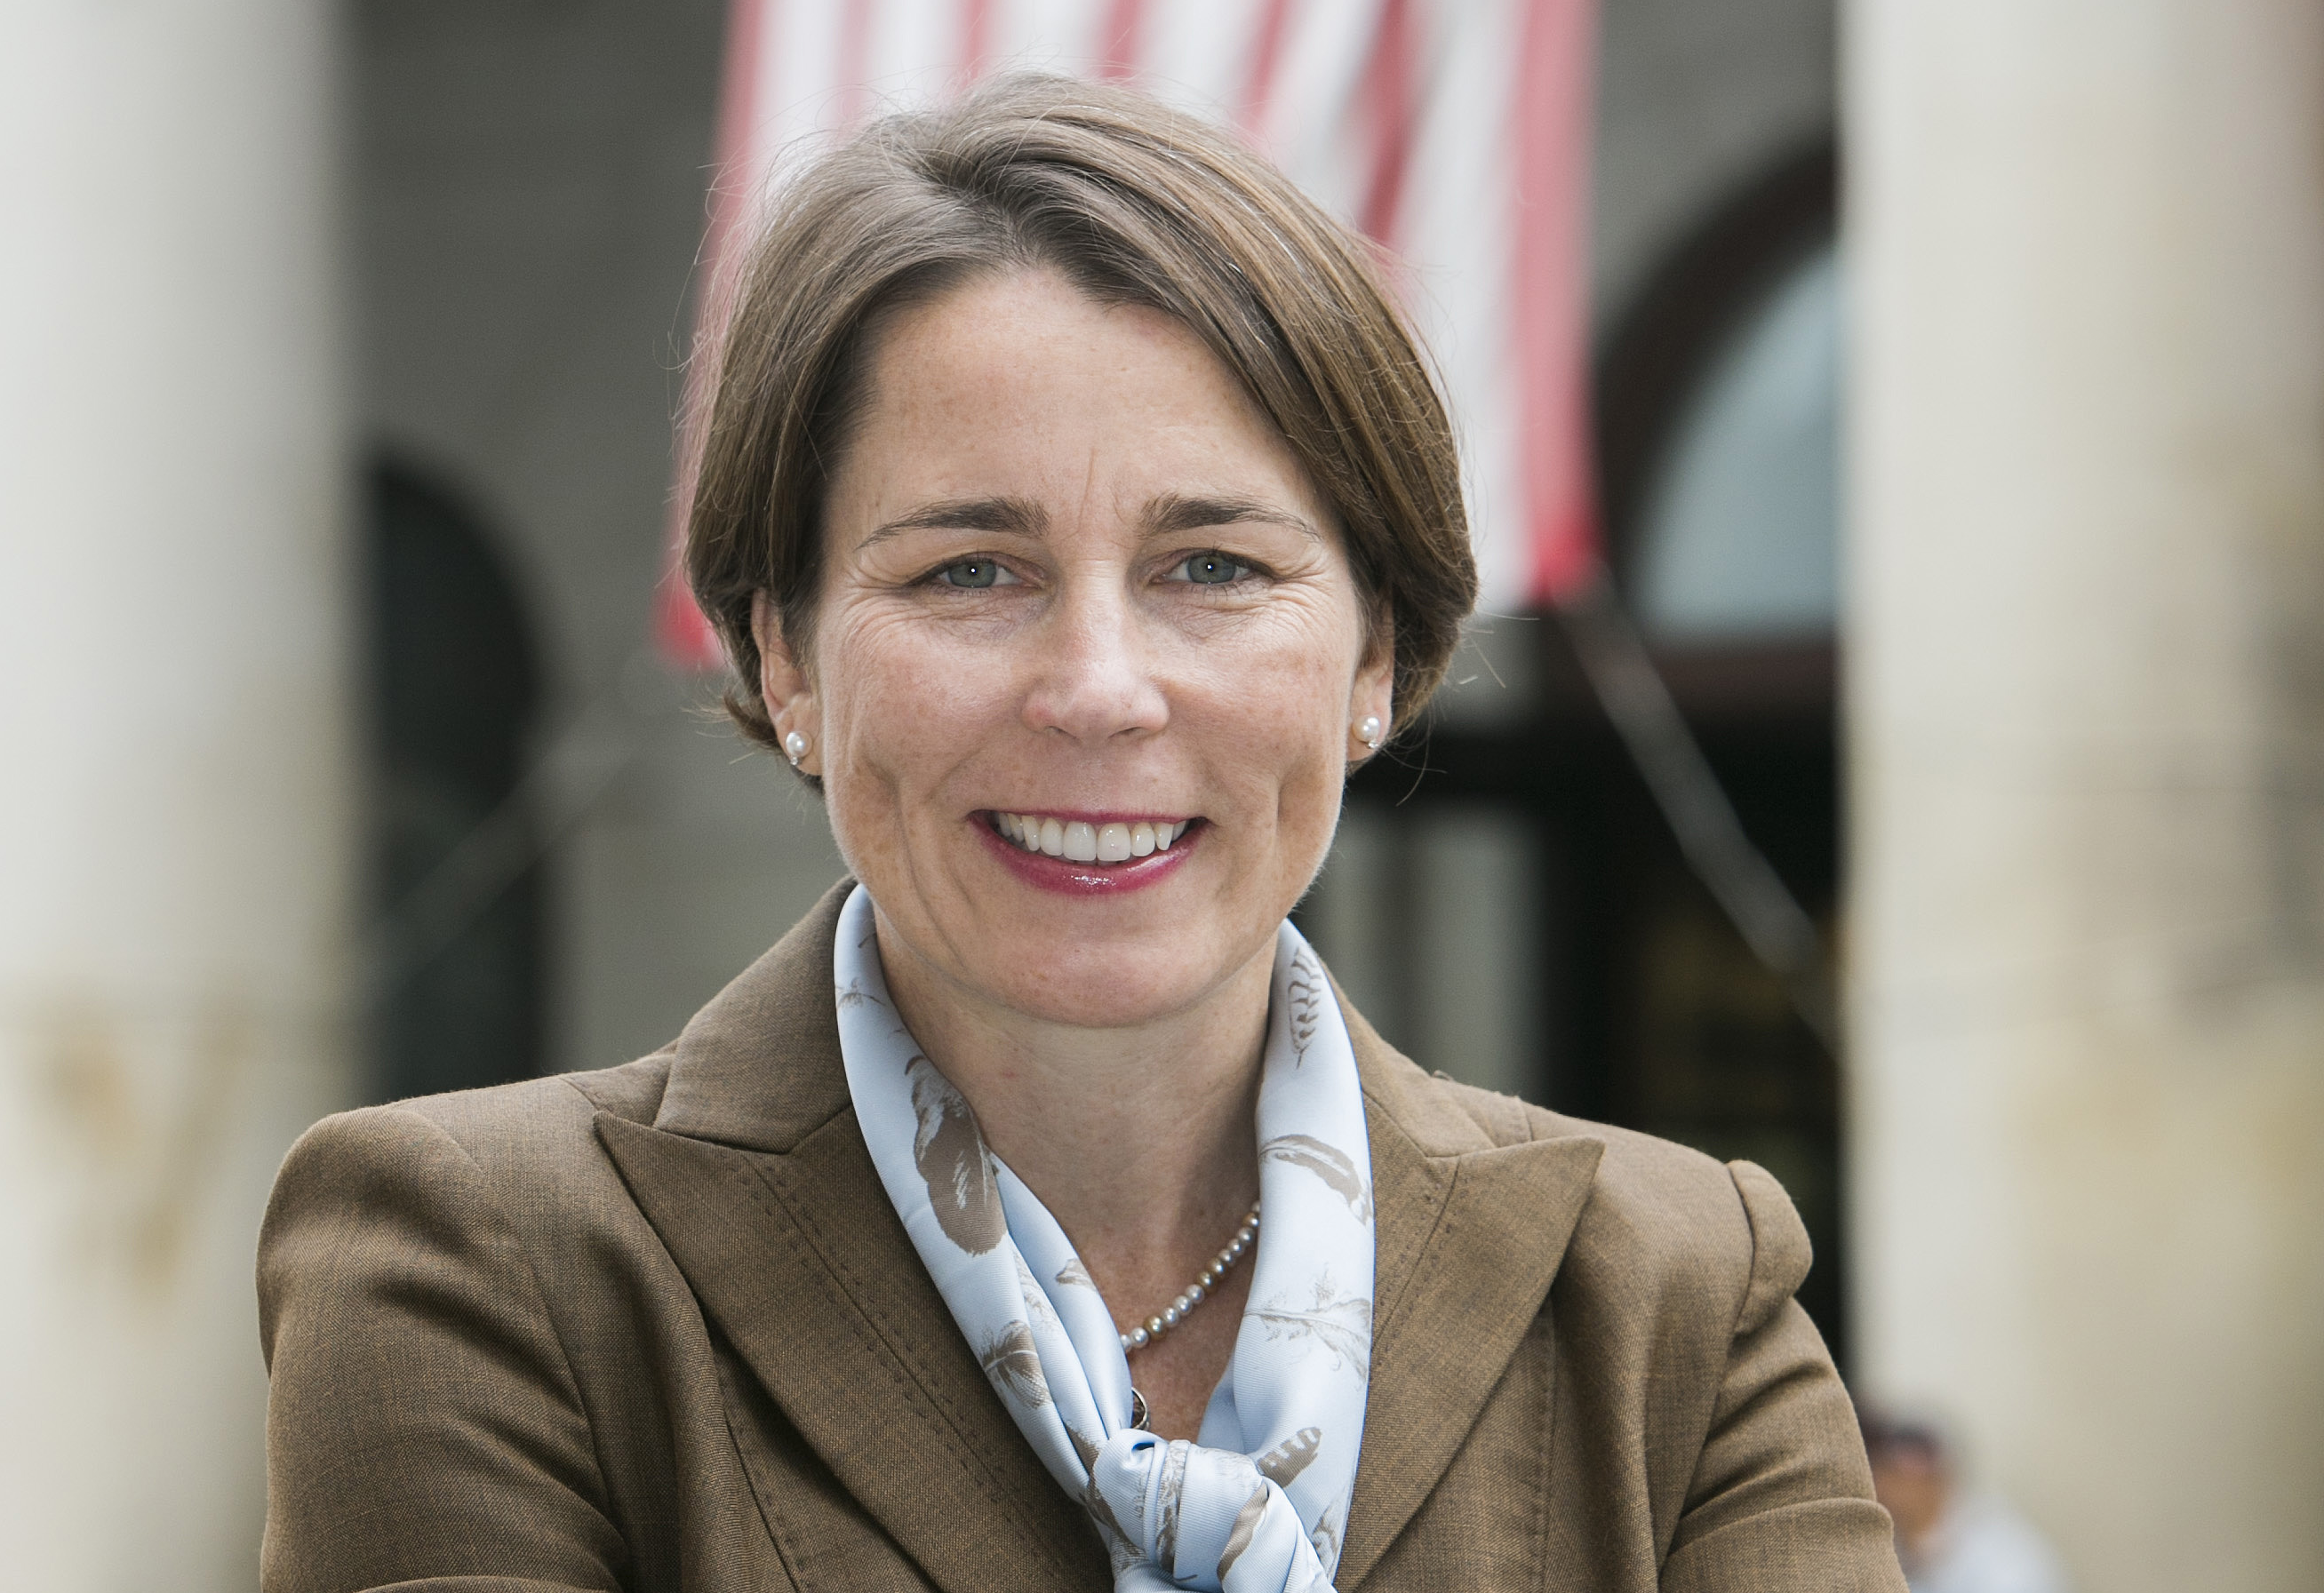 #TheArcVotes: Maura Healey Elected Governor of Massachusetts, Introducing New Administration to The Arc’s Advocacy